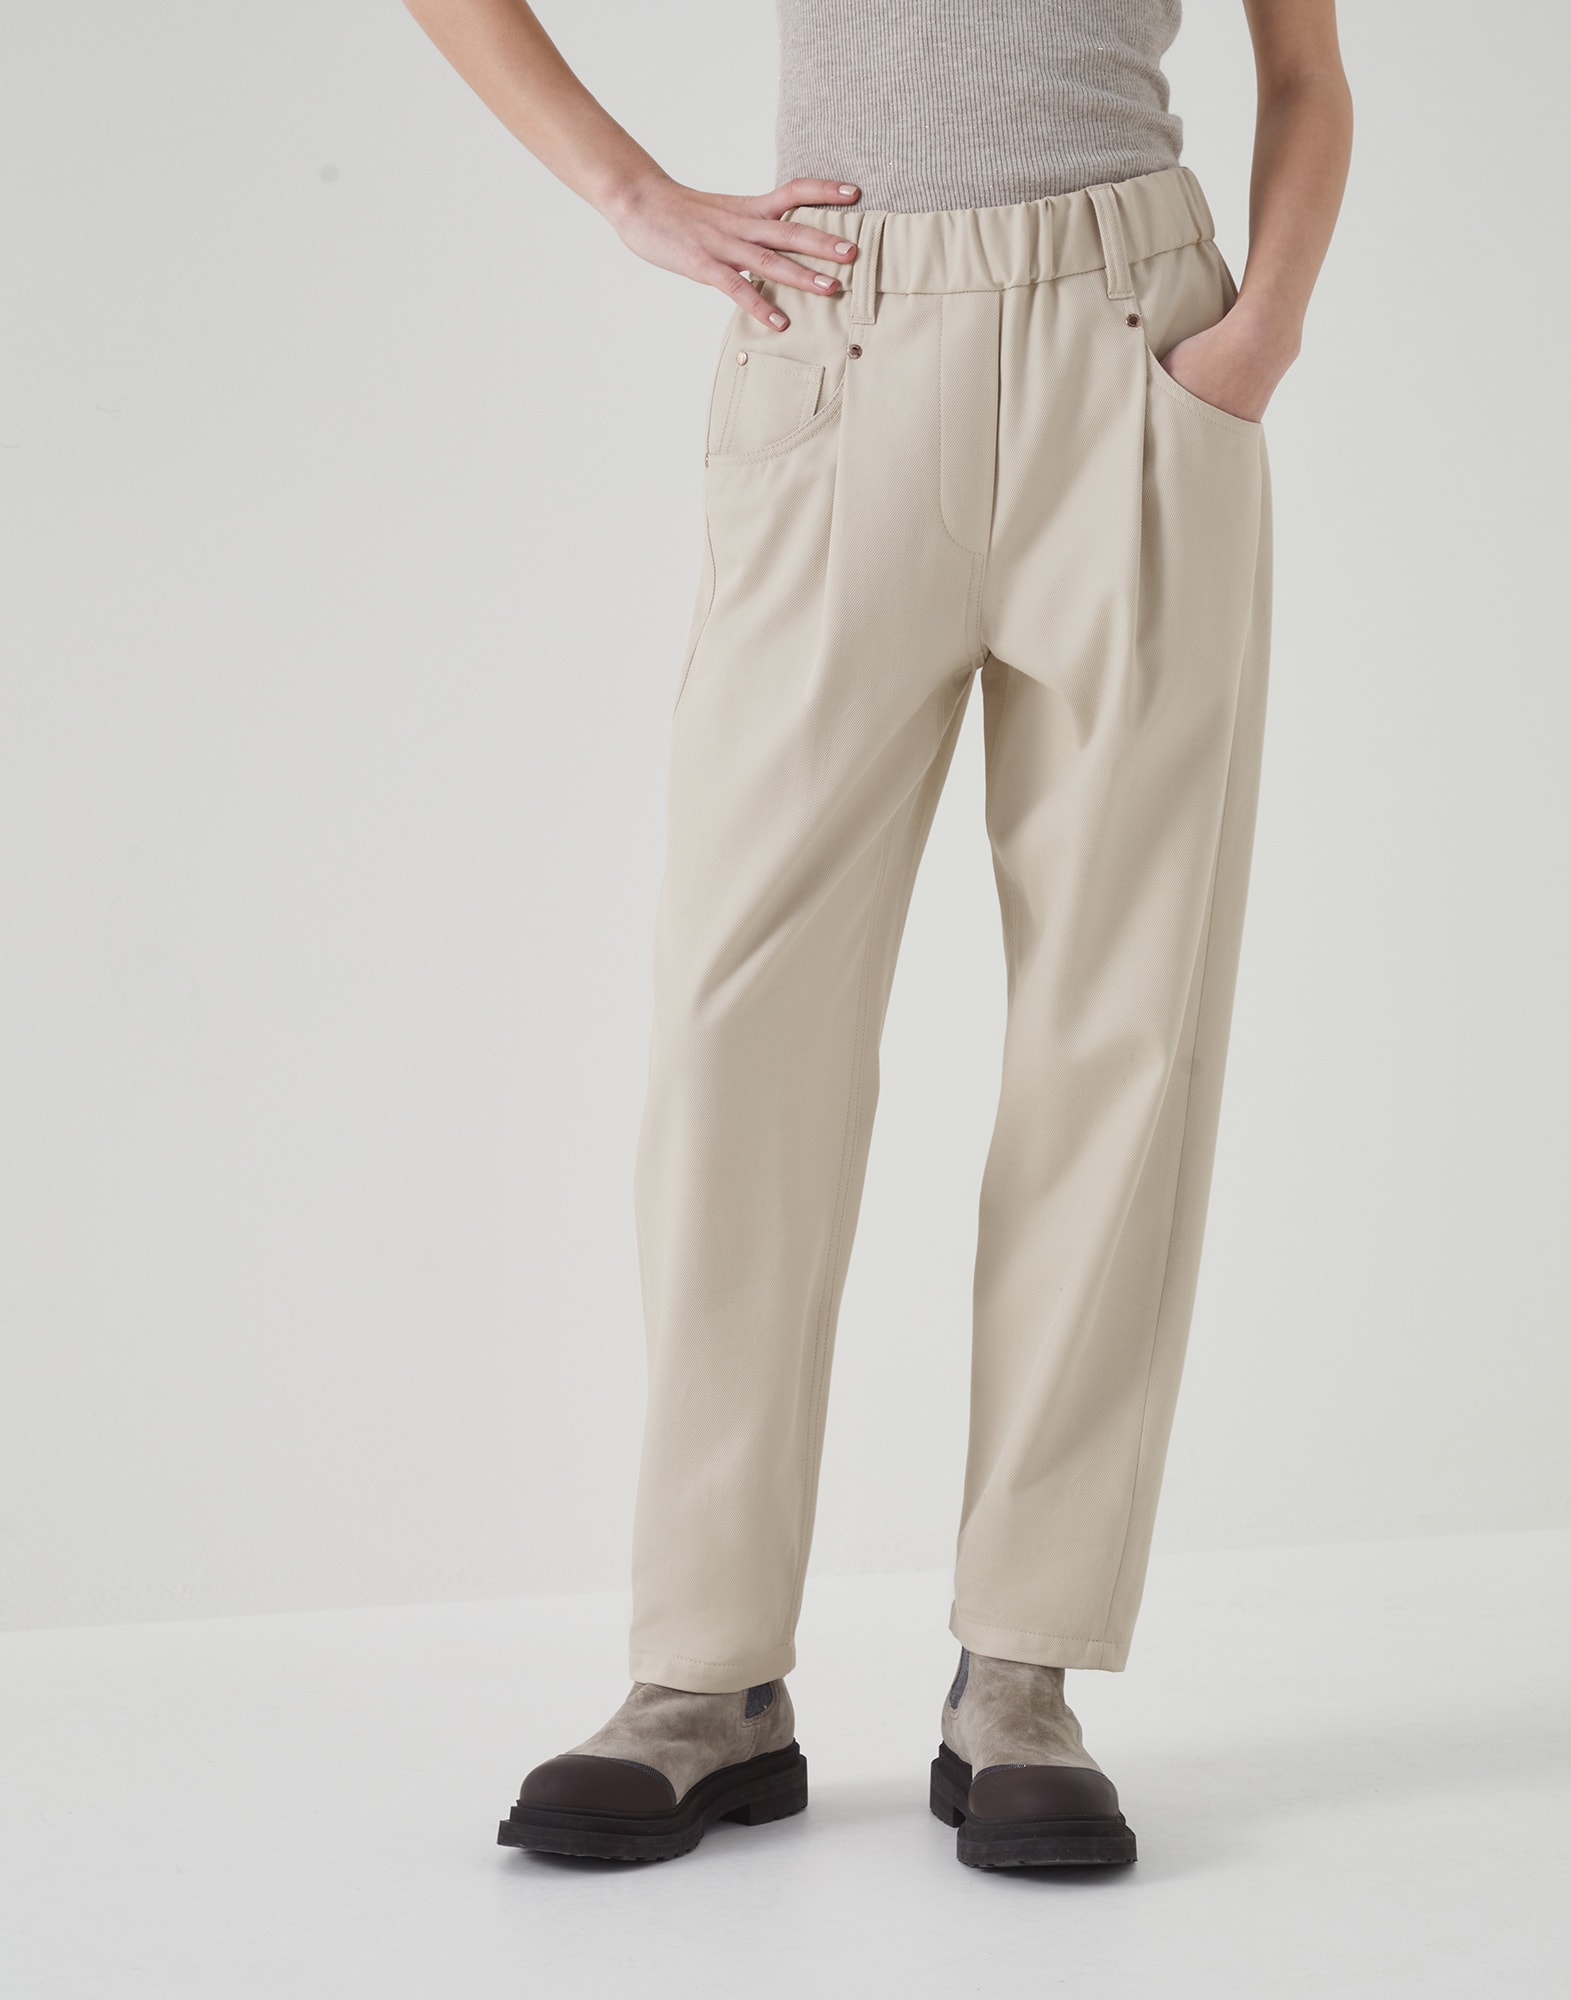 Baggy trousers Butter Woman -
                        Brunello Cucinelli
                    